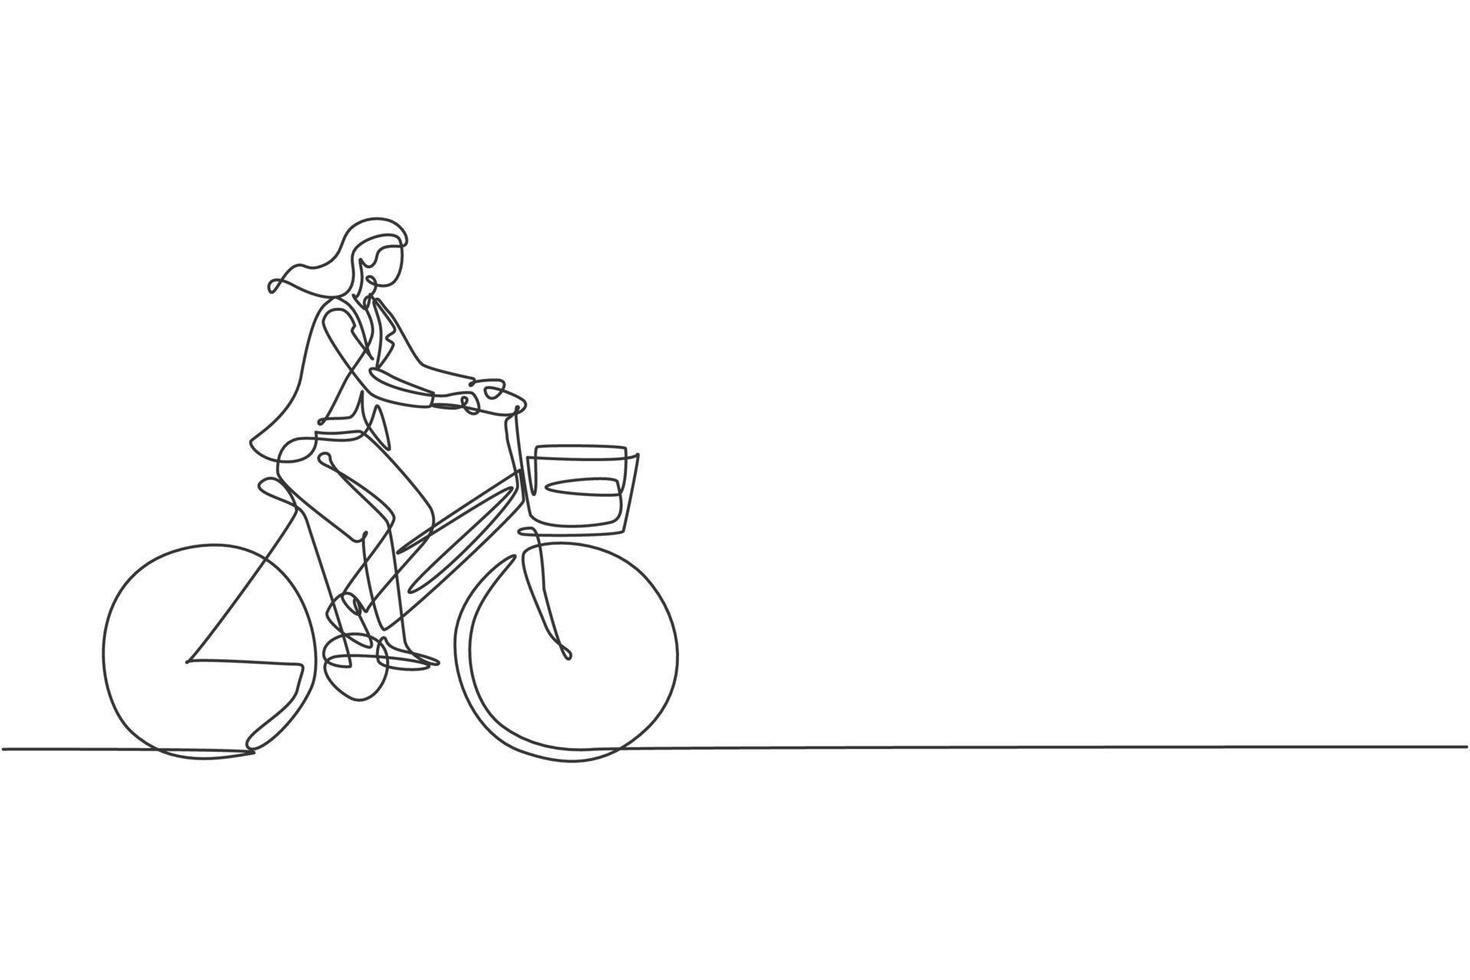 One single line drawing young happy startup employee woman ride bicycle to the coworking space graphic vector illustration. Healthy urban commuter lifestyle concept. Modern continuous line draw design